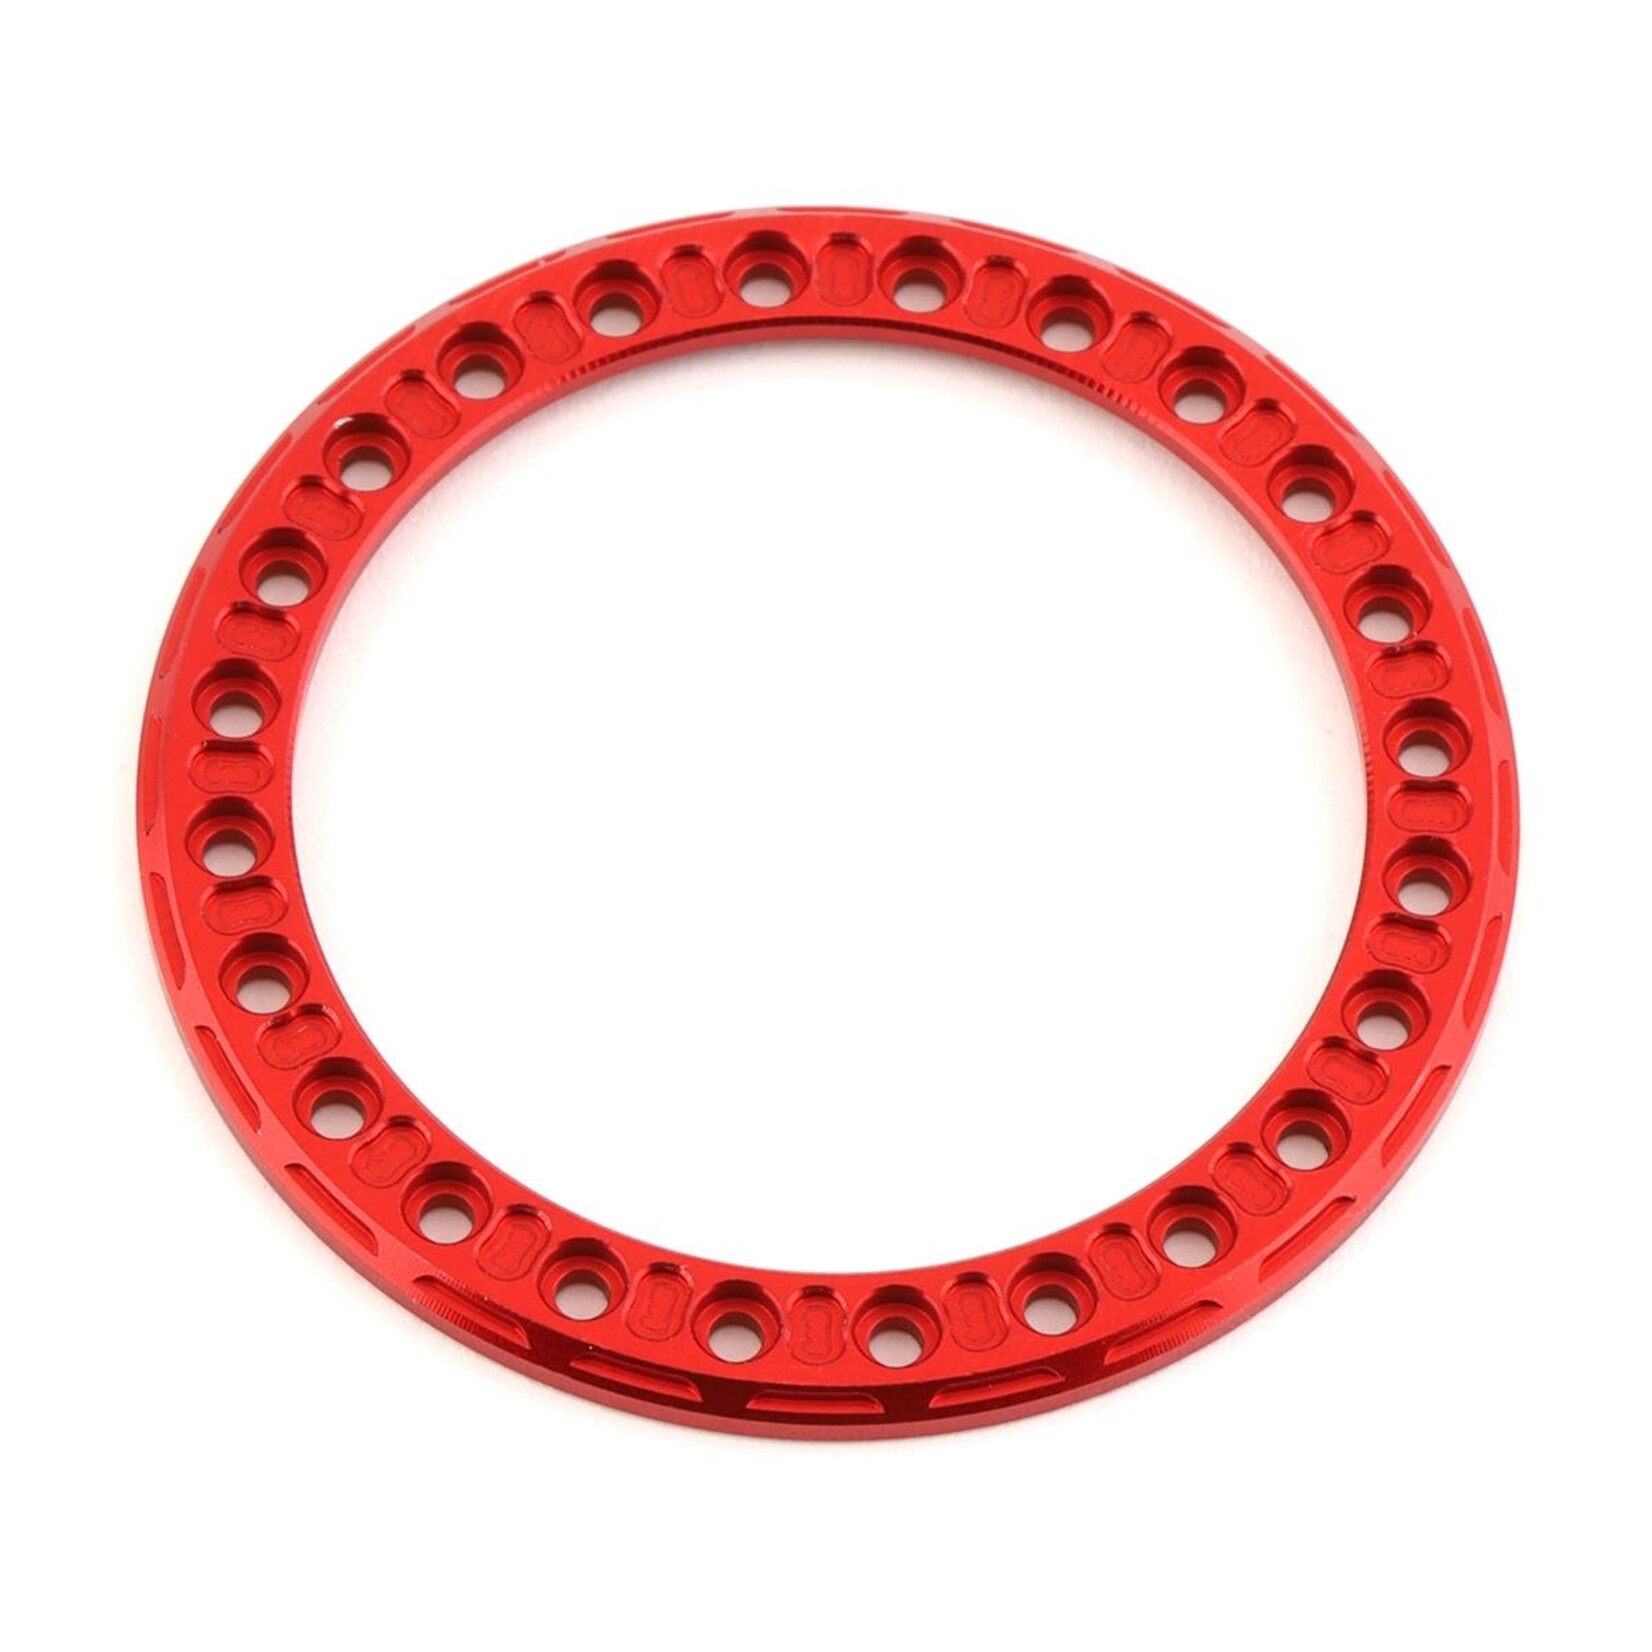 Vanquish Products Vanquish Products 1.9" IFR Skarn Beadlock Ring (Red) #VPS05443